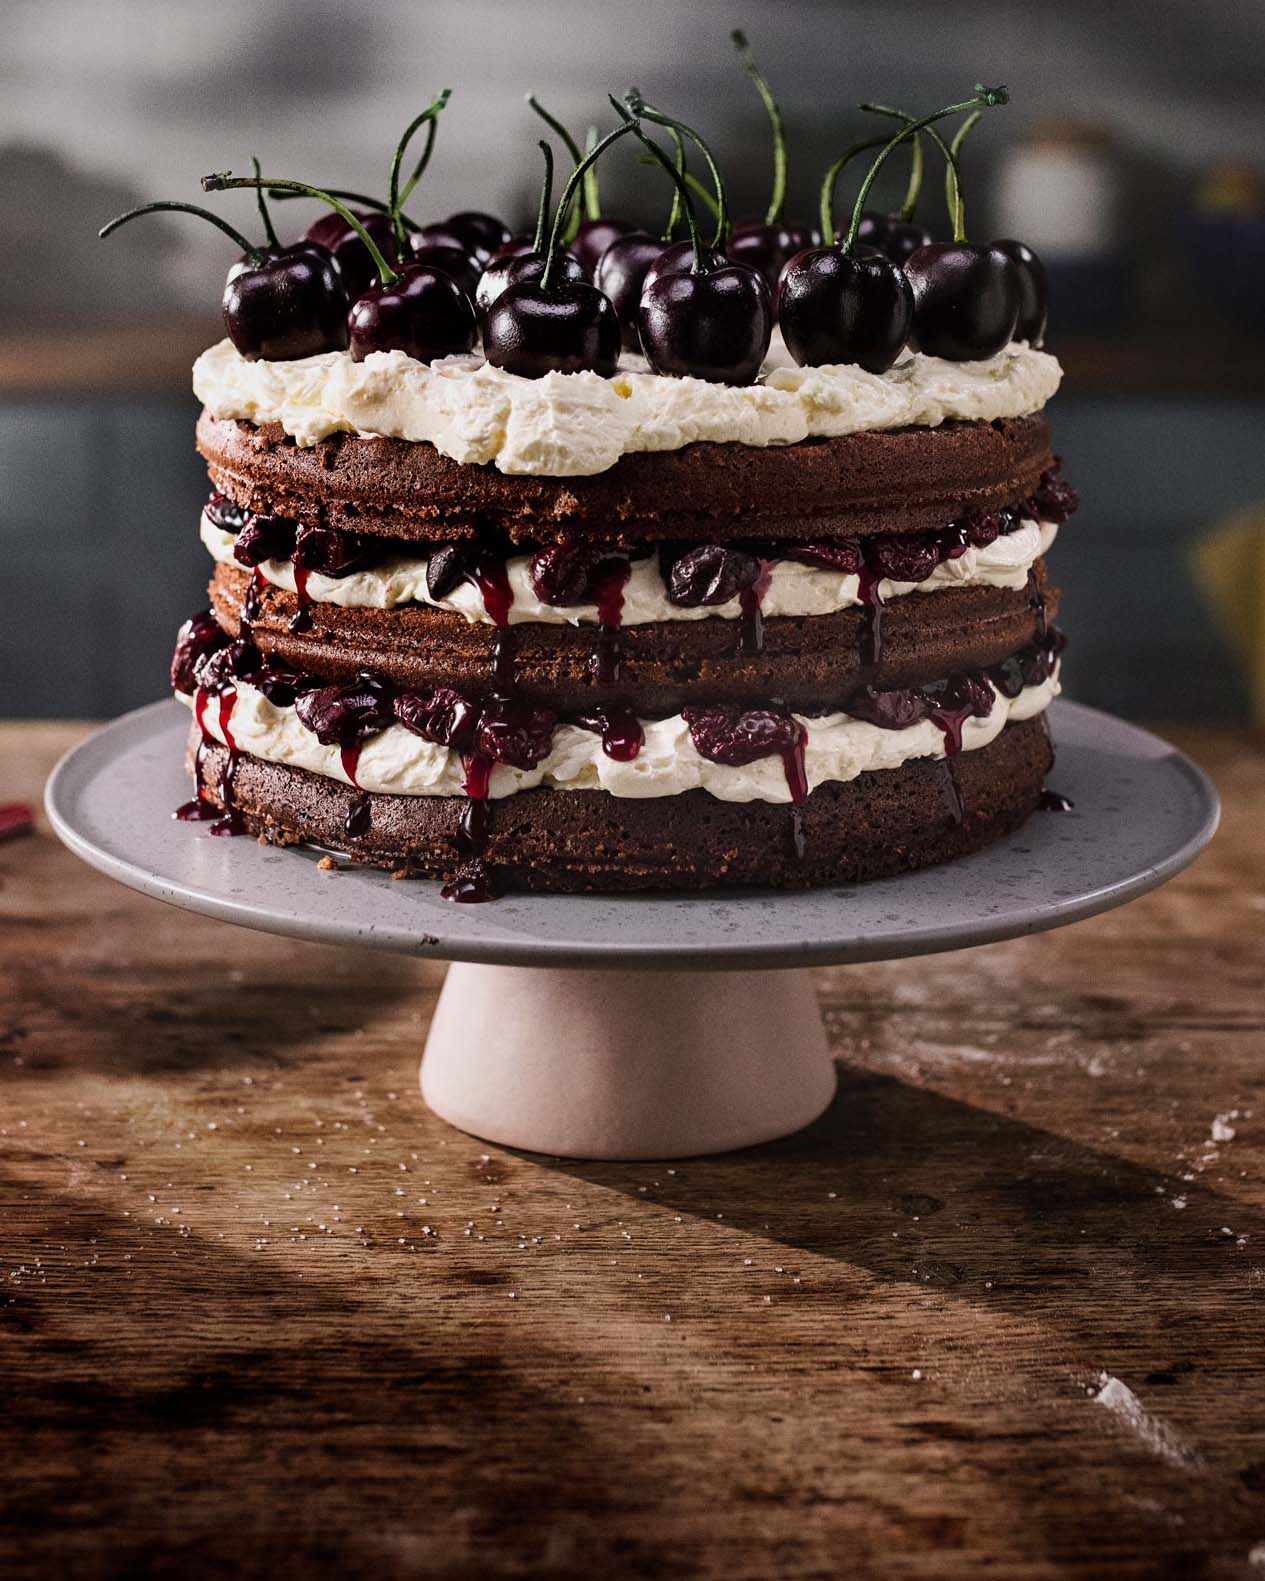 Gateau Cakes - Next Day Delivery | Patisserie Valerie